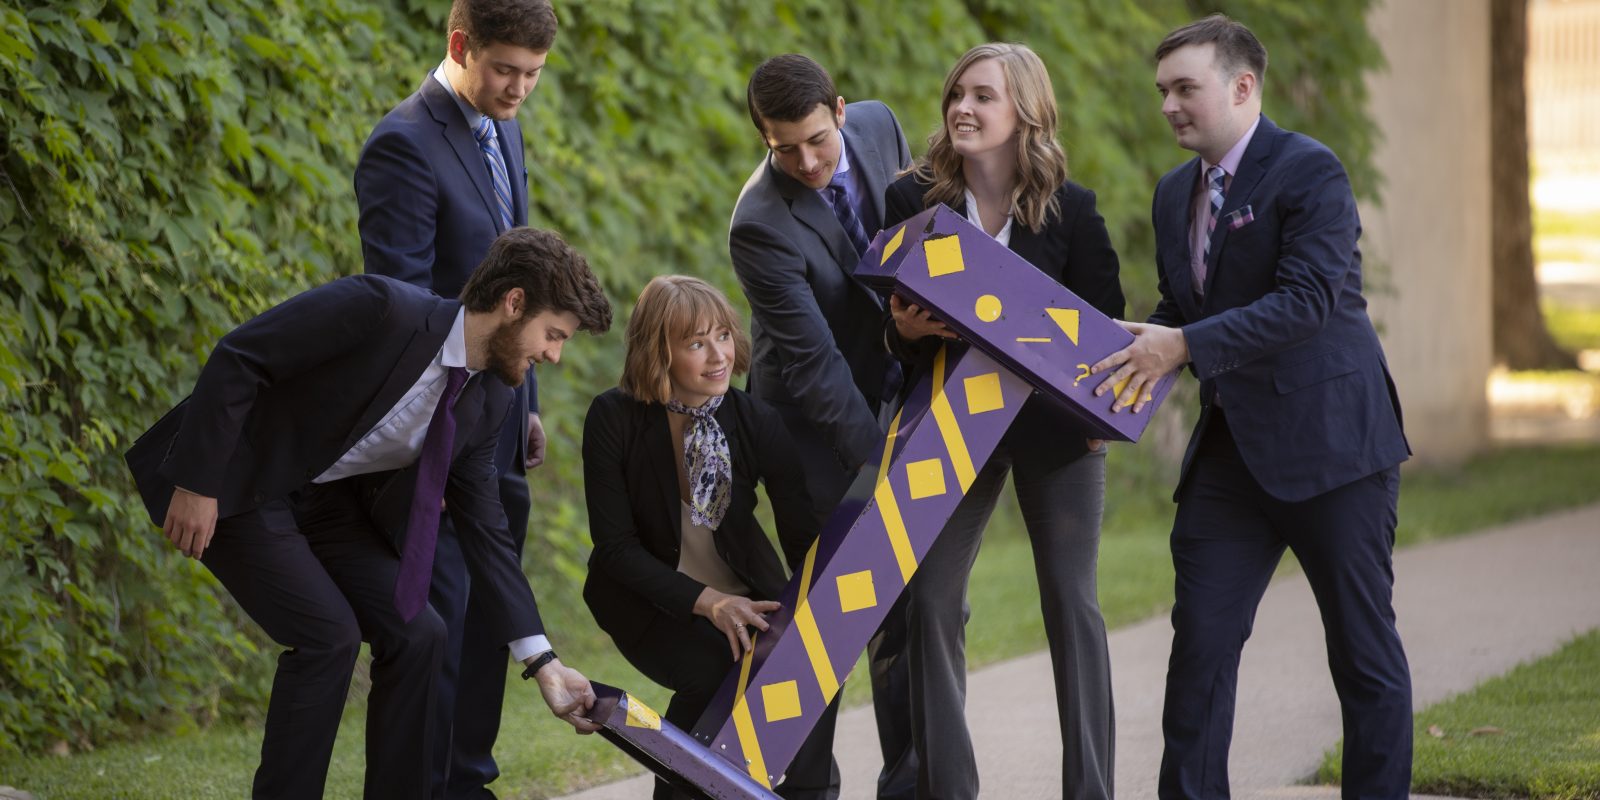 The TCU Forensic Speech & Debate team from left, Matthew Gill; Ryan Debish; Isabel Dunkleberger; Kyle Deer; Sarah Douglass; Logan Gibbs on May 7, 2021. TCU’s forensic speech and debate team has a great national record. It was reenergized about 6 years ago under the direction of Amorette Hinderaker, convener of debates and associate professor of communications. They're still debating competitively, but over Zoom. Photo by Joyce Marshall